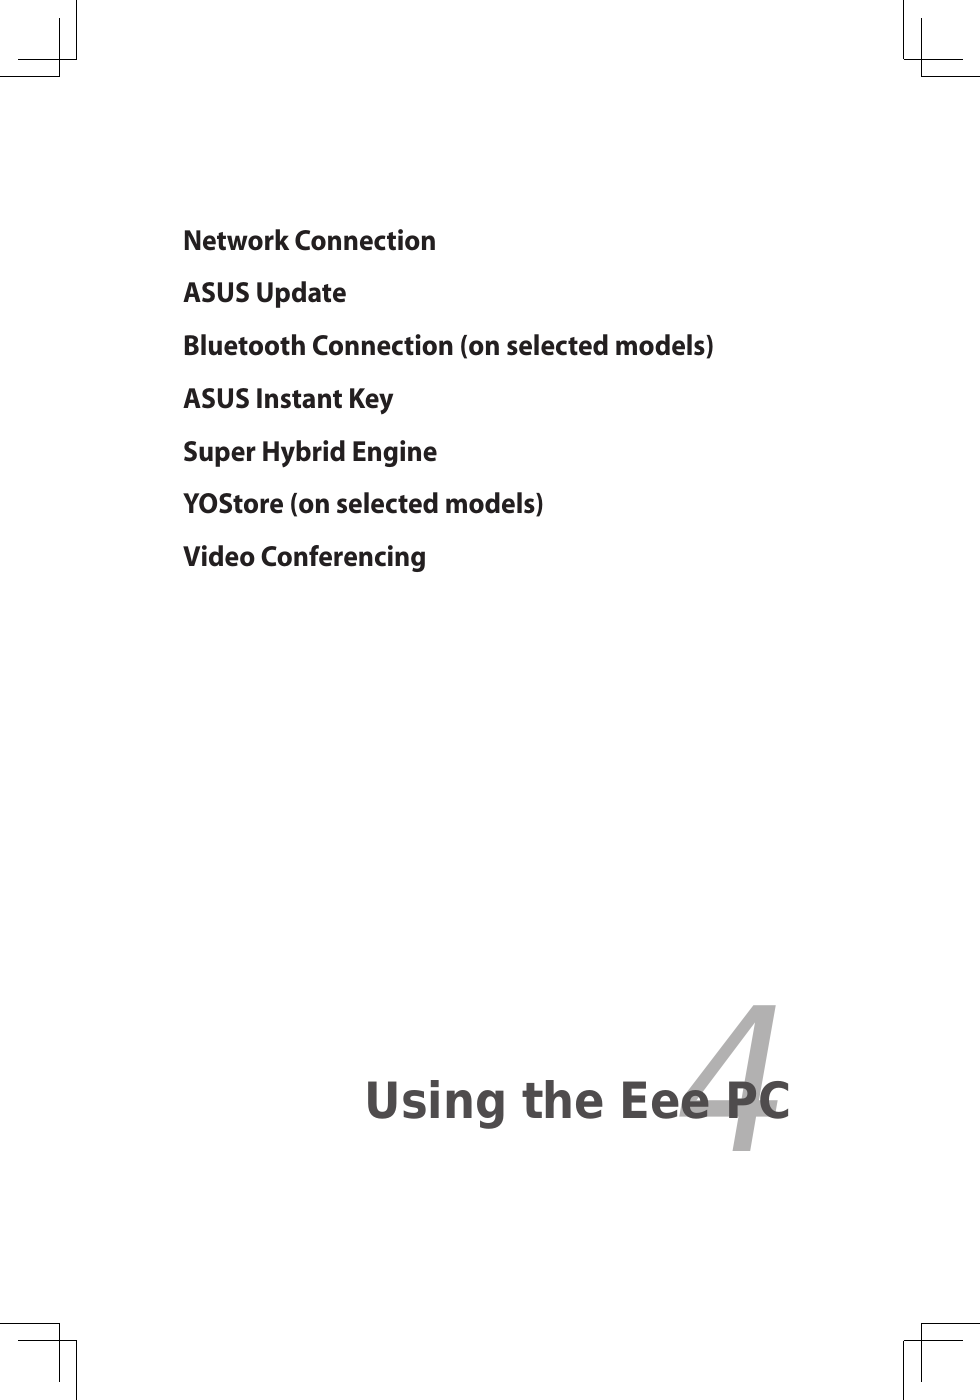 Network ConnectionASUS UpdateBluetooth Connection (on selected models)ASUS Instant KeySuper Hybrid EngineYOStore (on selected models)Video Conferencing4Using the Eee PC